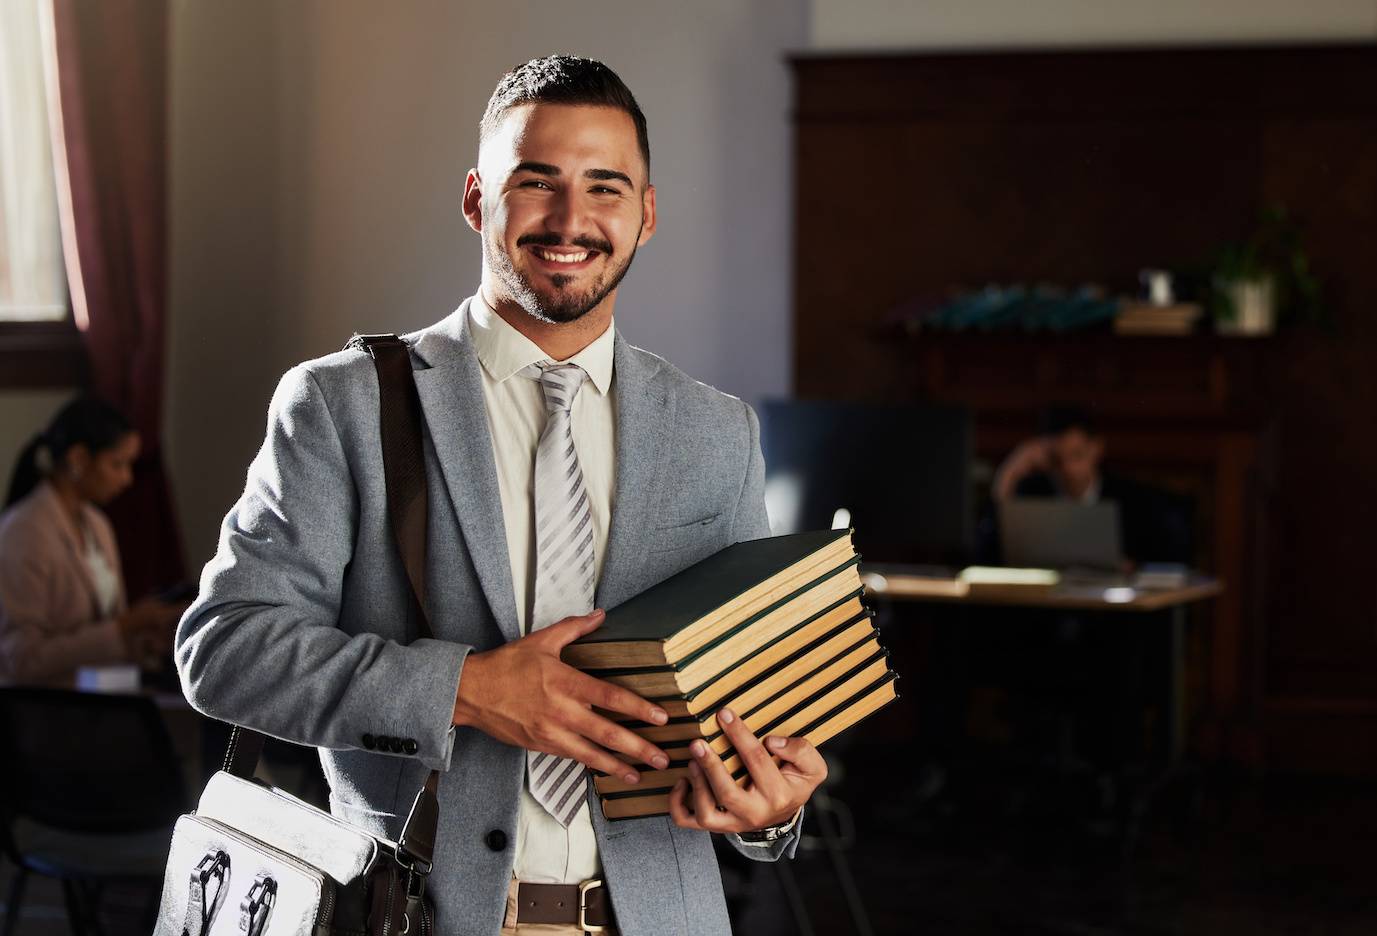 Law student holding law books and smiling at the camera